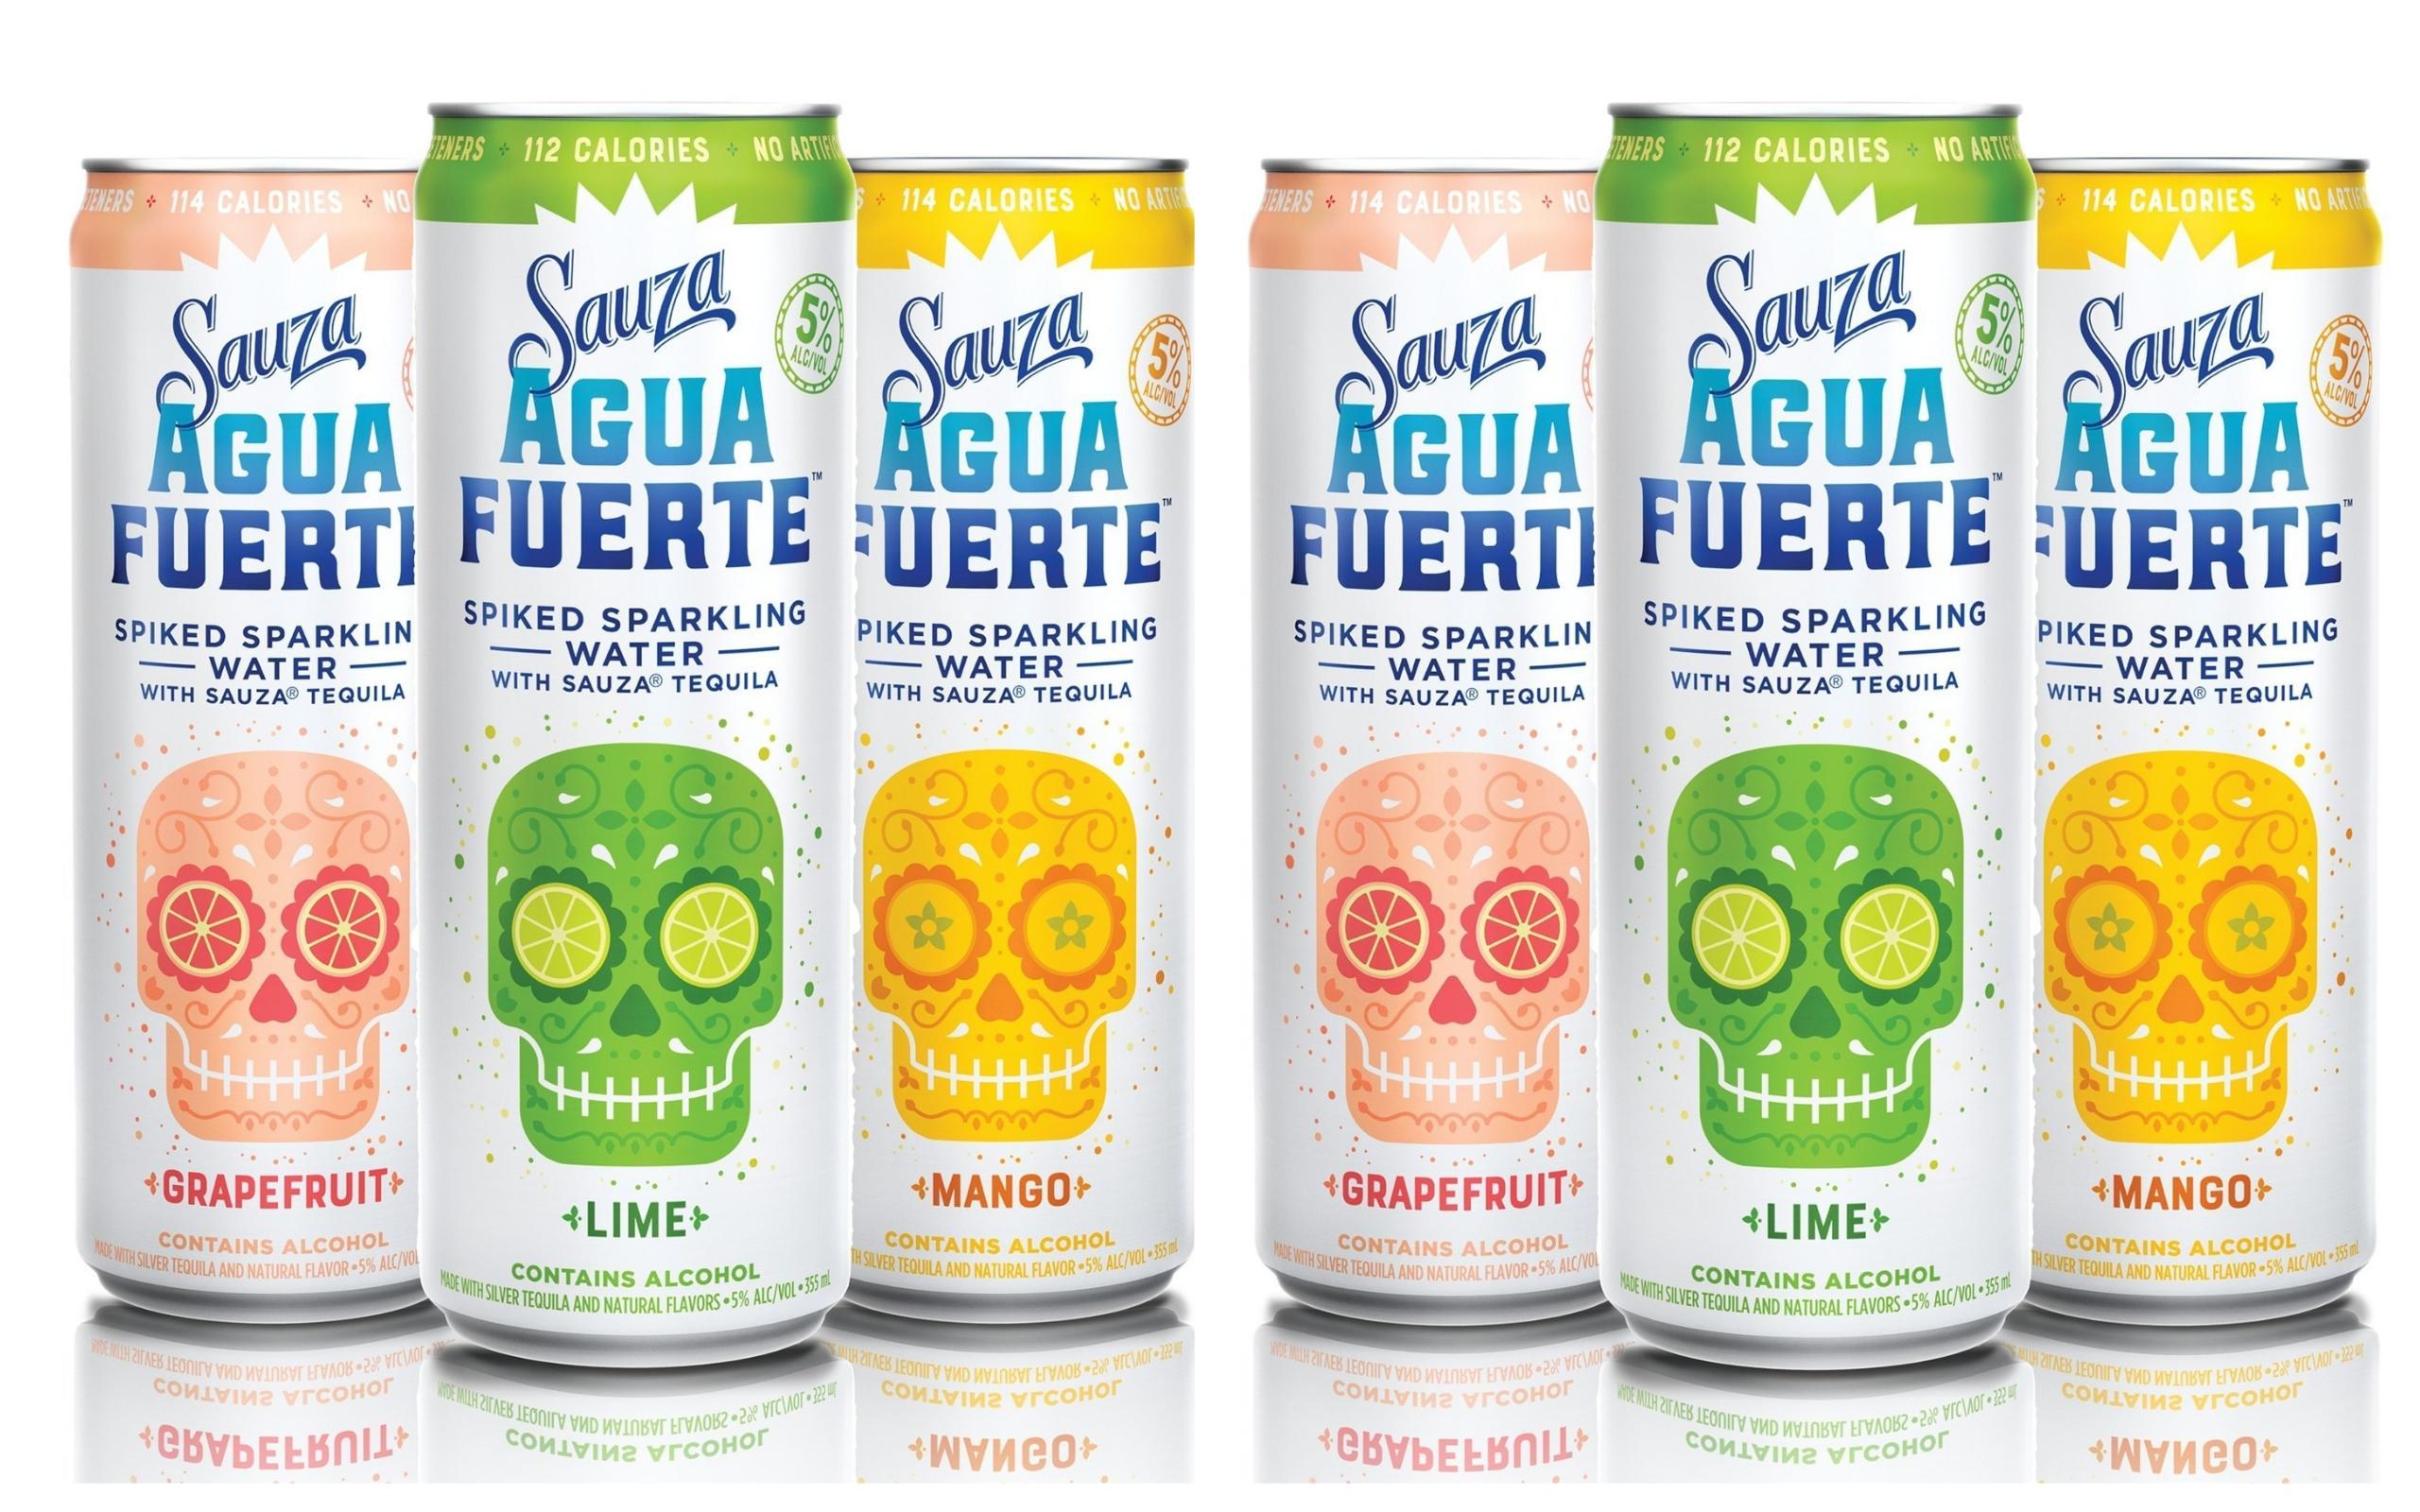 This Tequila Spiked Sparkling Water From Sauza Tequila Is